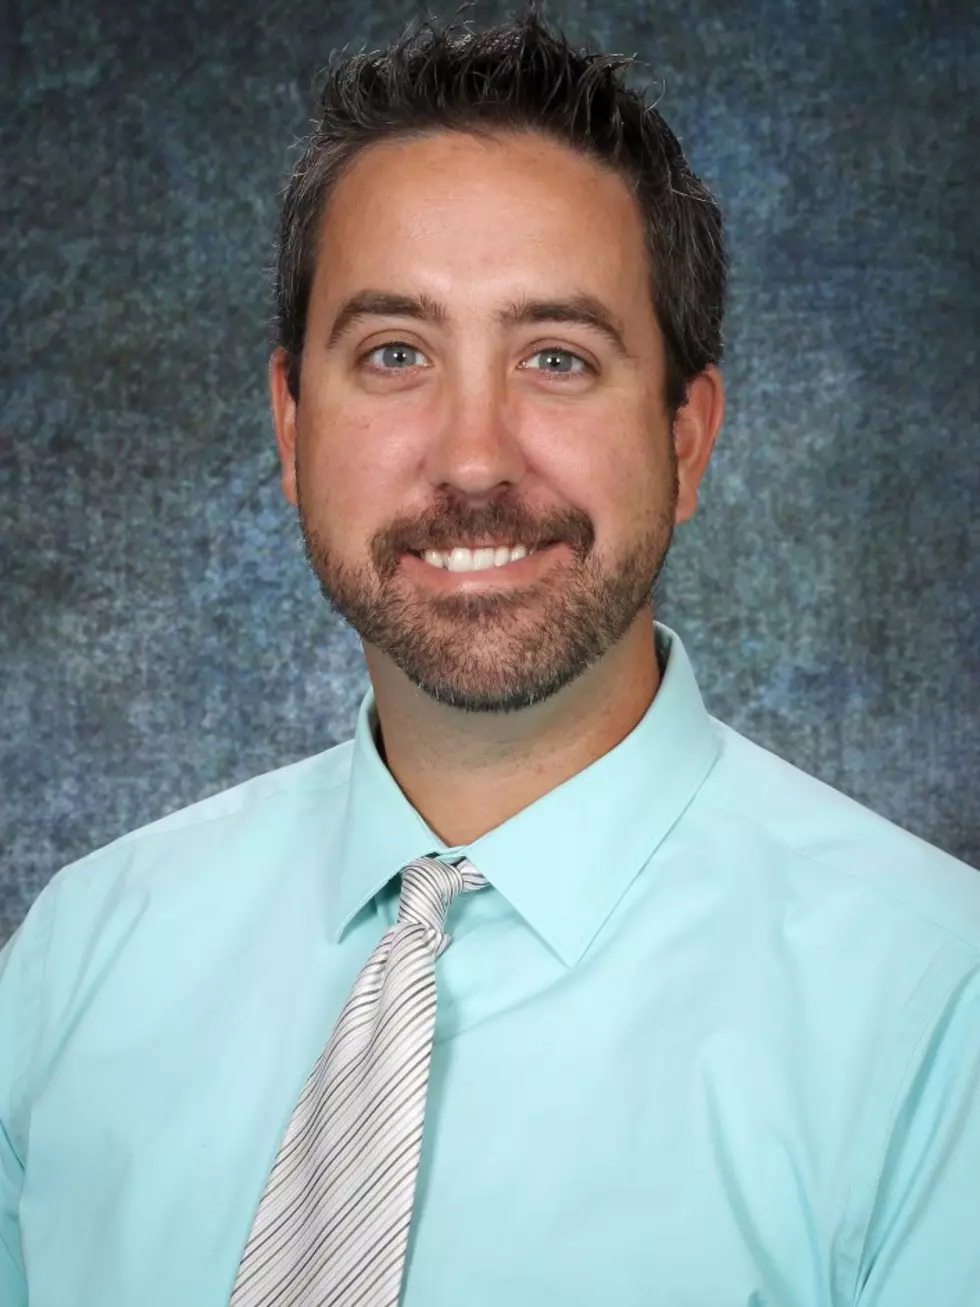 New Principal Appointed for Dubuque’s Washington Middle School